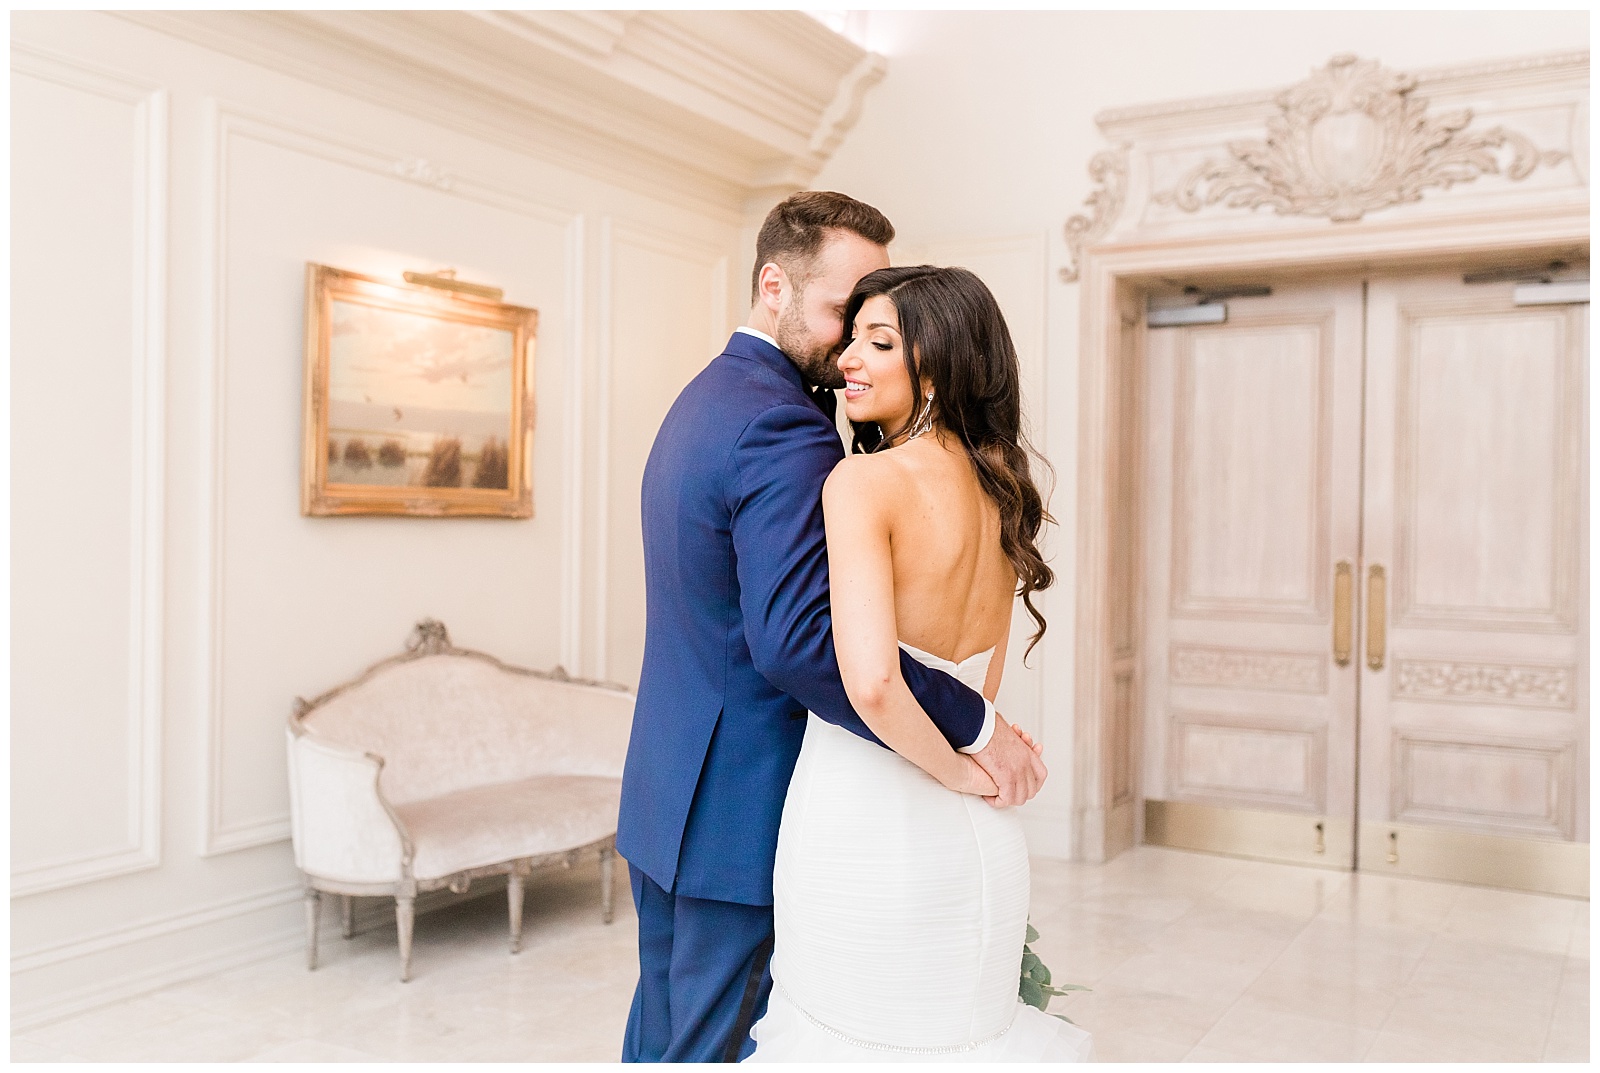 Park Chateau Wedding, Photographer, New Jersey, NJ, Winter, Bride and Groom Portraits, Light and Airy, High End, Luxury wedding